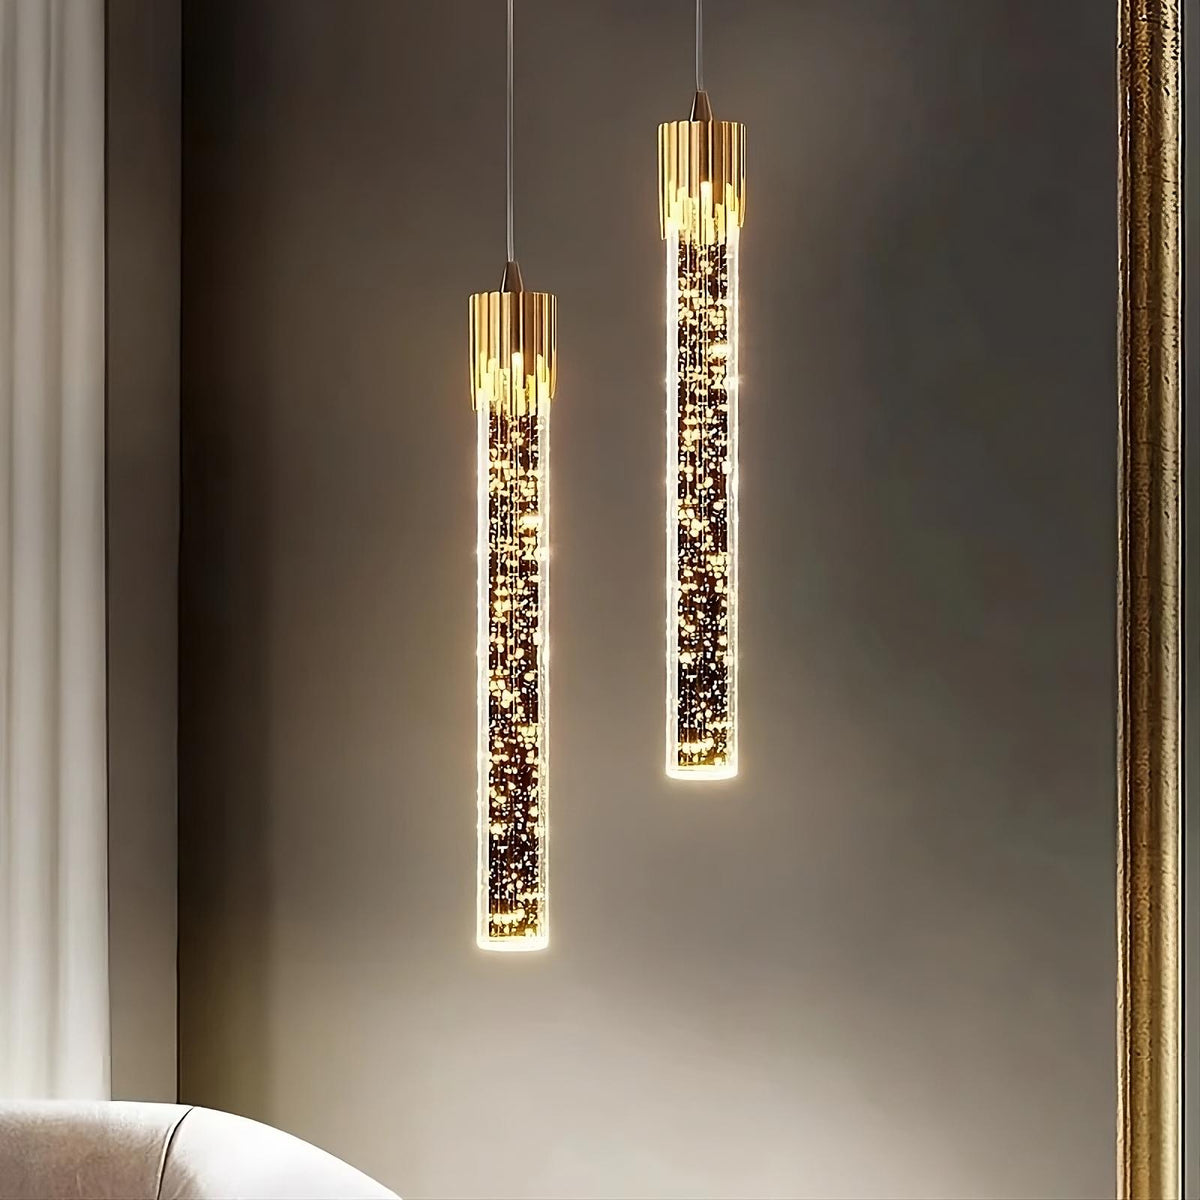 Two modern, cylindrical pendant lights with gold tops and sparkling, crystal-encrusted bodies hang from the ceiling in front of a beige wall. These Modern Minimalist LED Pendant Lights by Morsale.com feature 3W LED Chips and a frosted exterior. A partial view of a white sofa and a gold-edged mirror frame are also visible in the scene.